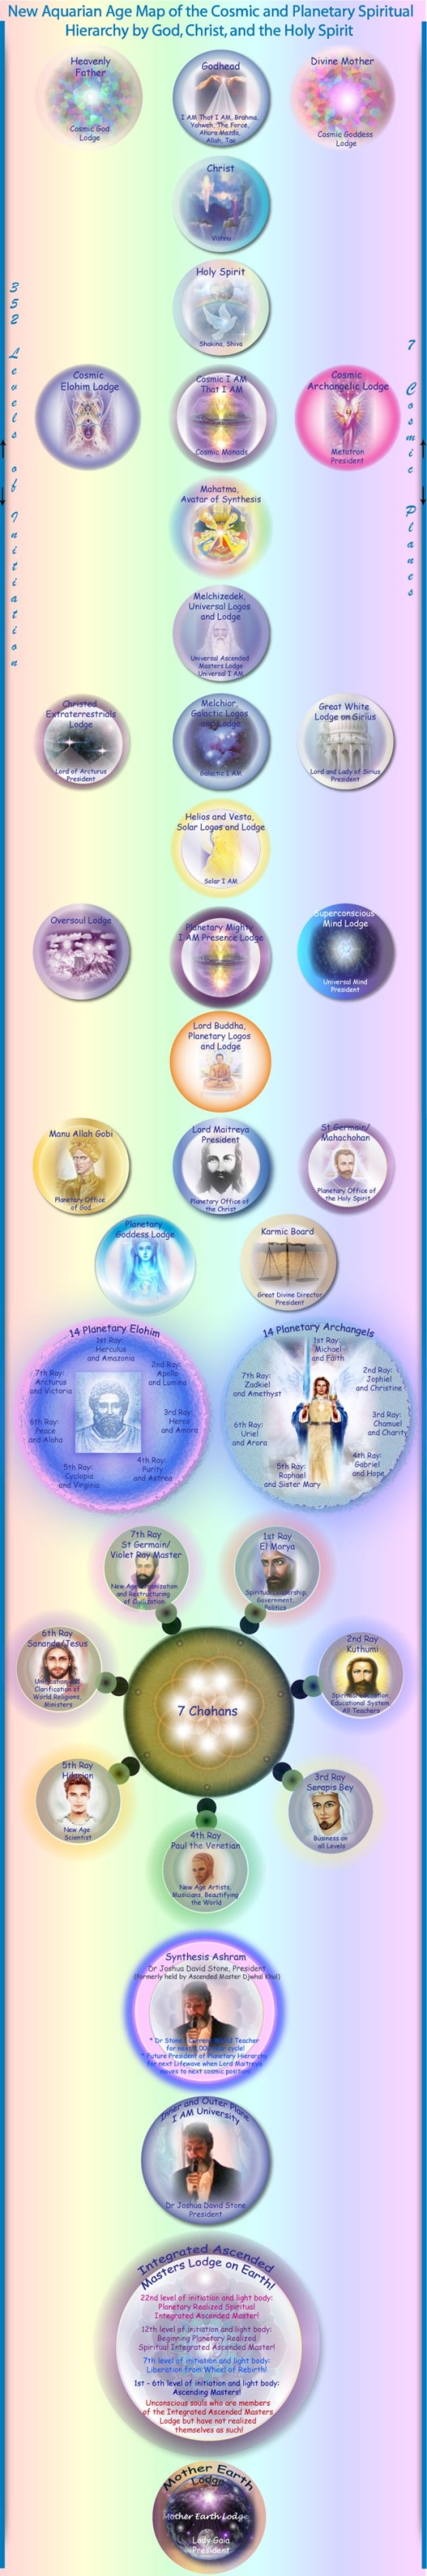 New Cosmic Map of the Spiritual Hierarchy